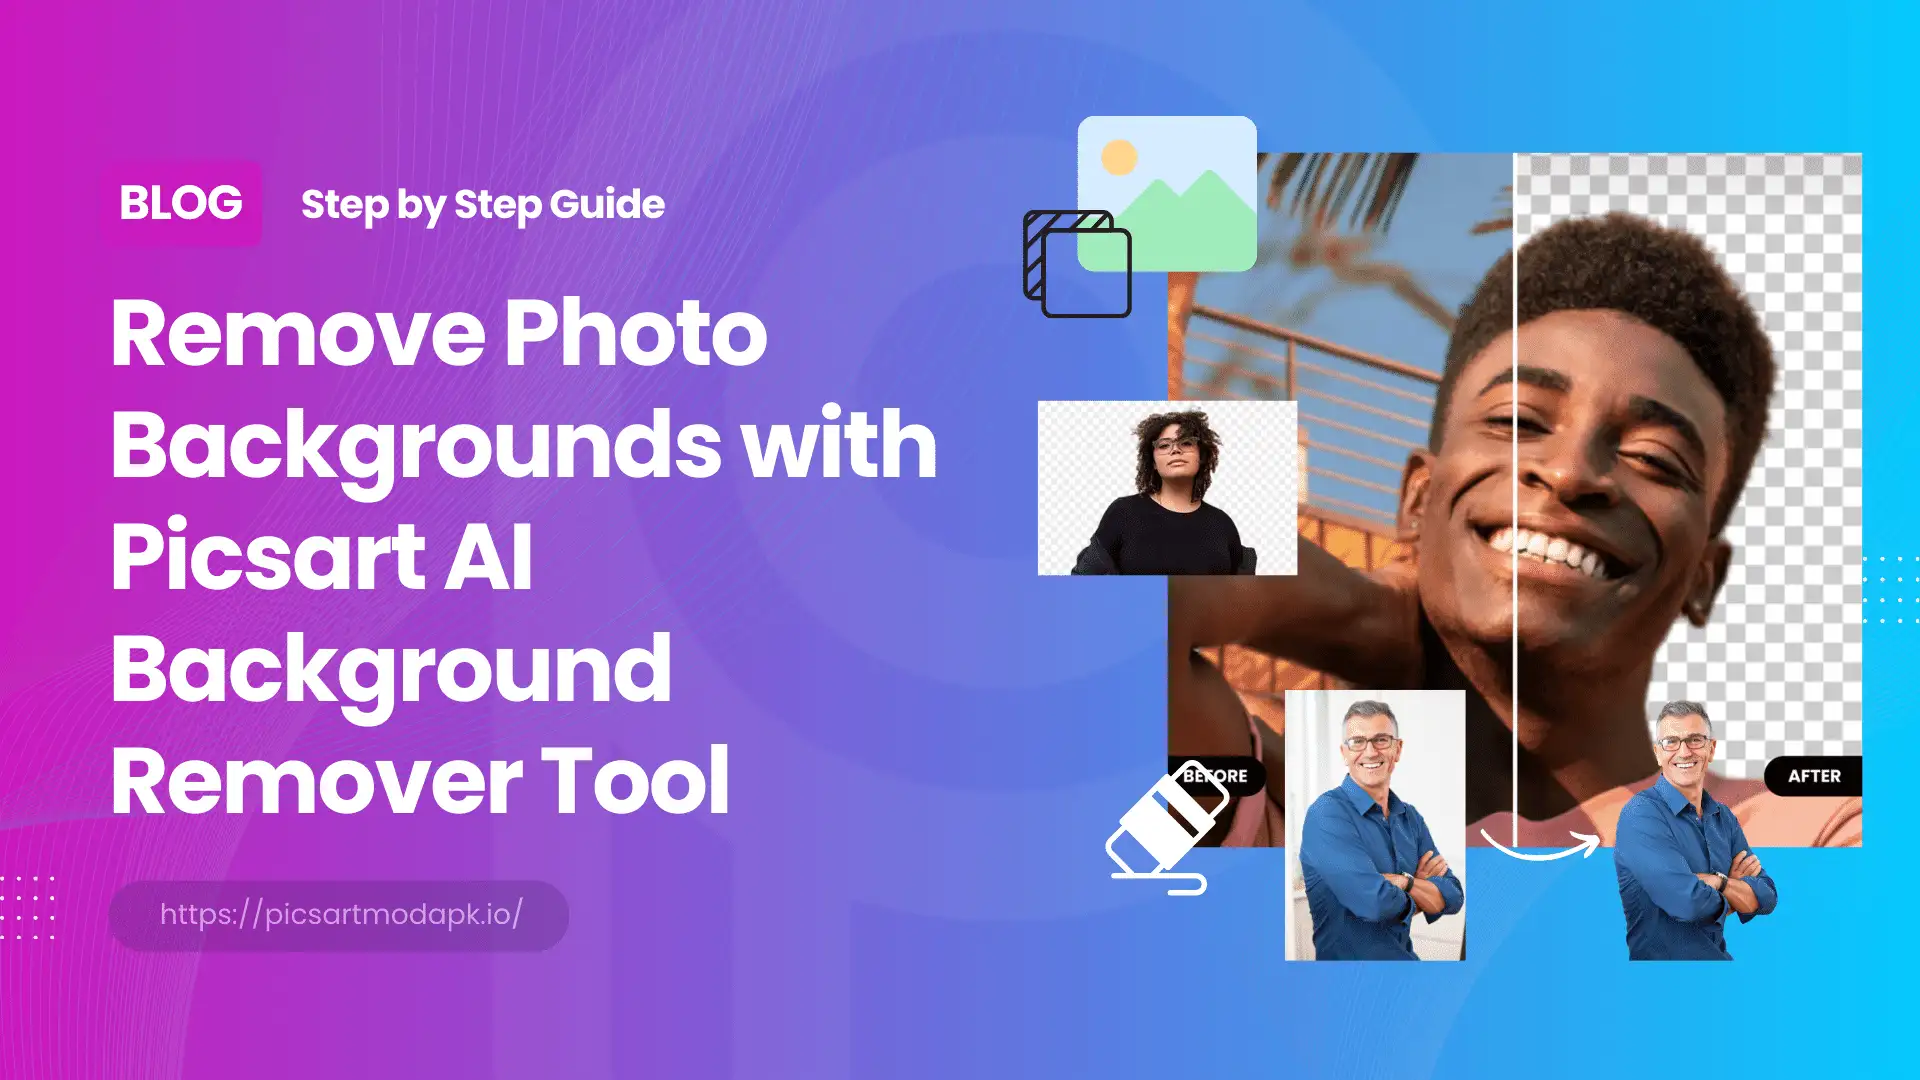 Remove Photo Backgrounds with Picsart Background Remover Tool - Blog